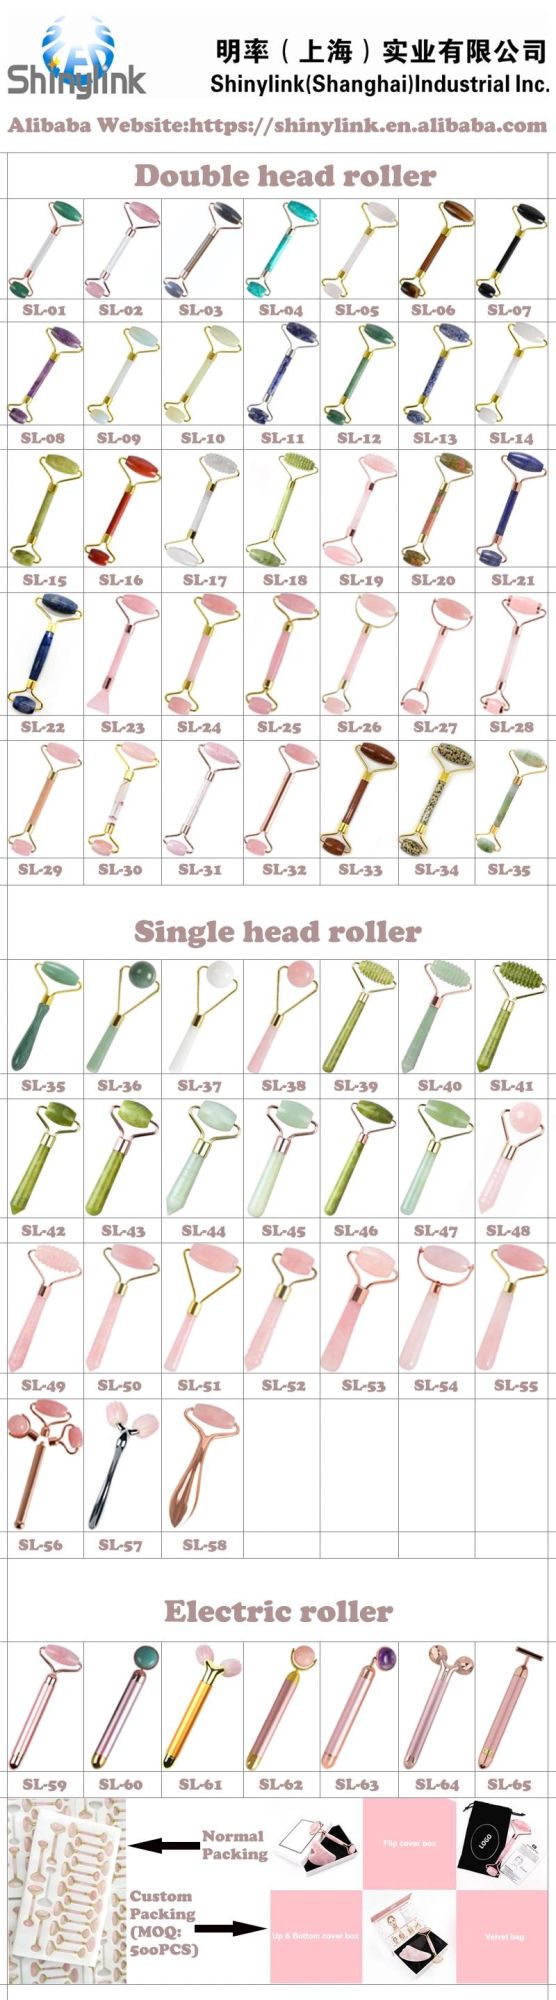 Anti-Aging Jade Roller Face-Neck Massager Facial Body Eye Puffiness Treatment Dong Ling Jade Roller